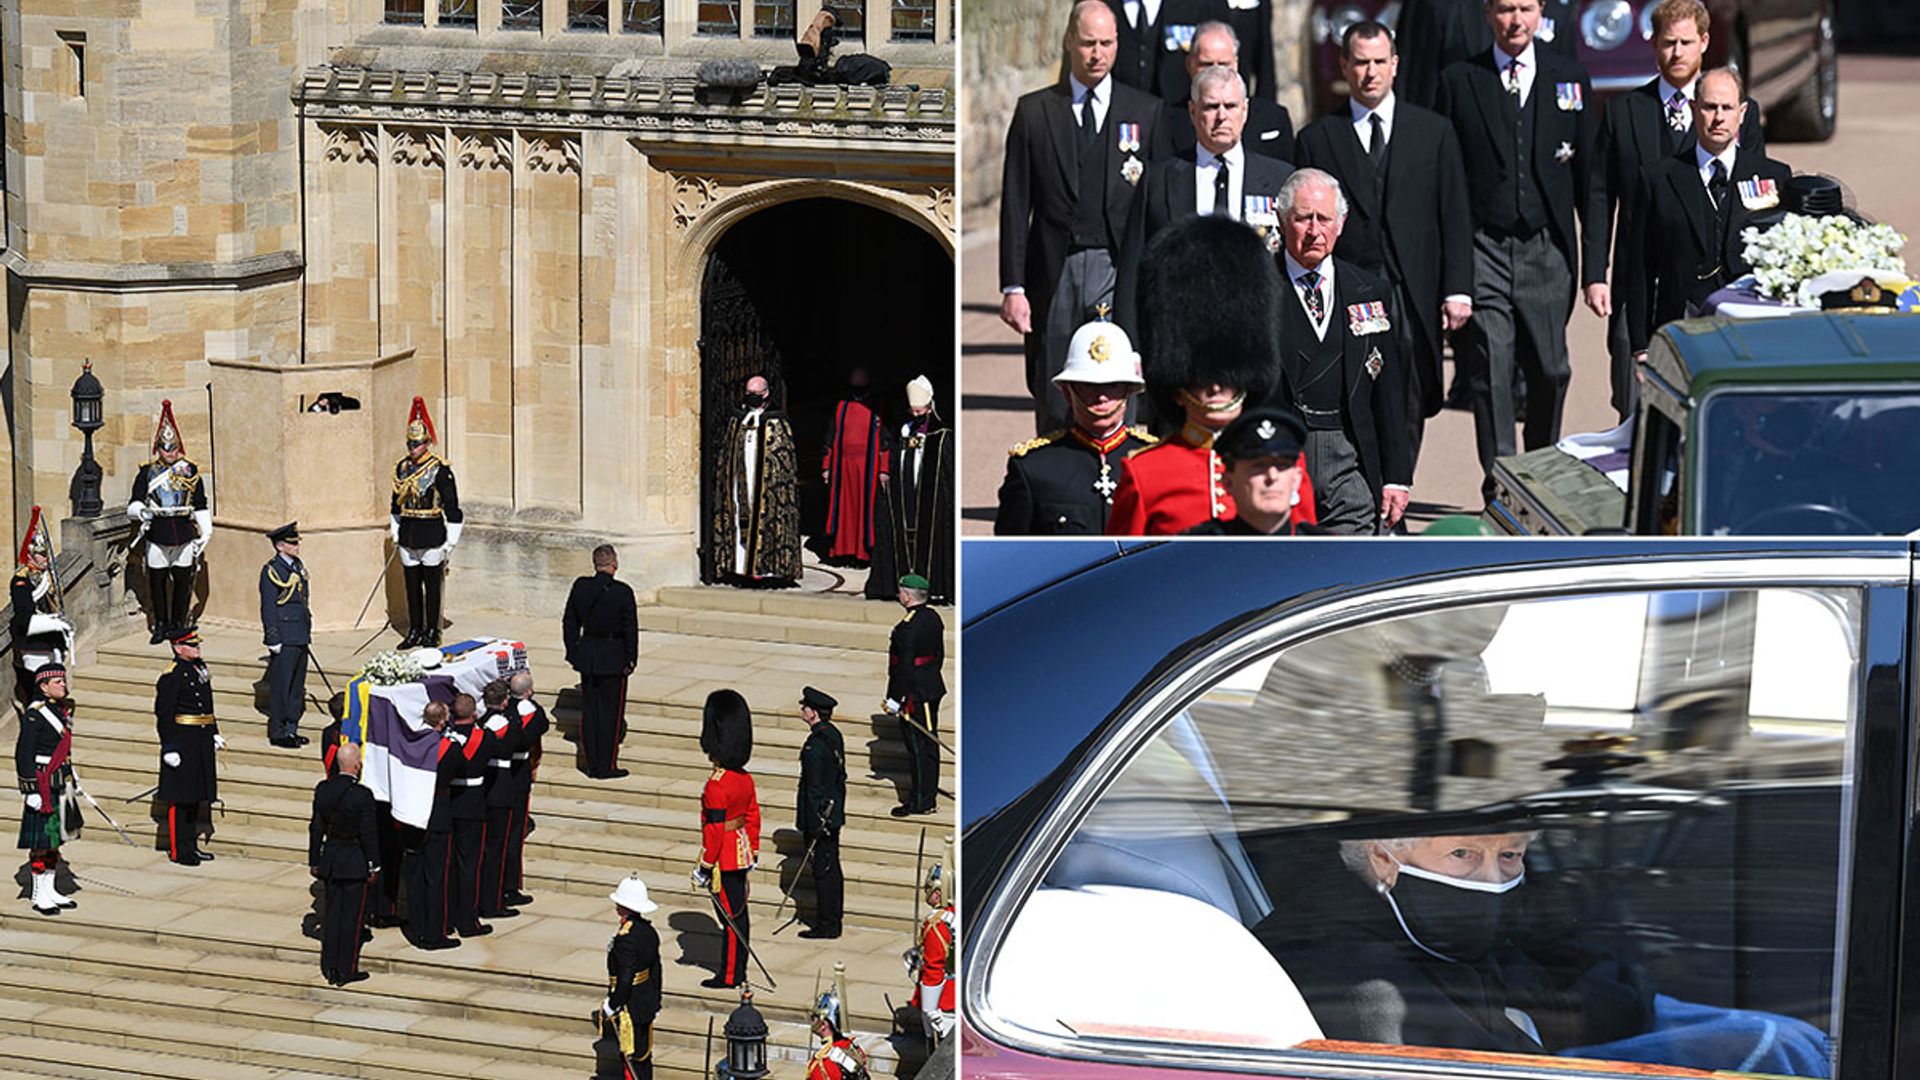 Prince Philip's dignified funeral: a look back at the royal family's heartbreaking day